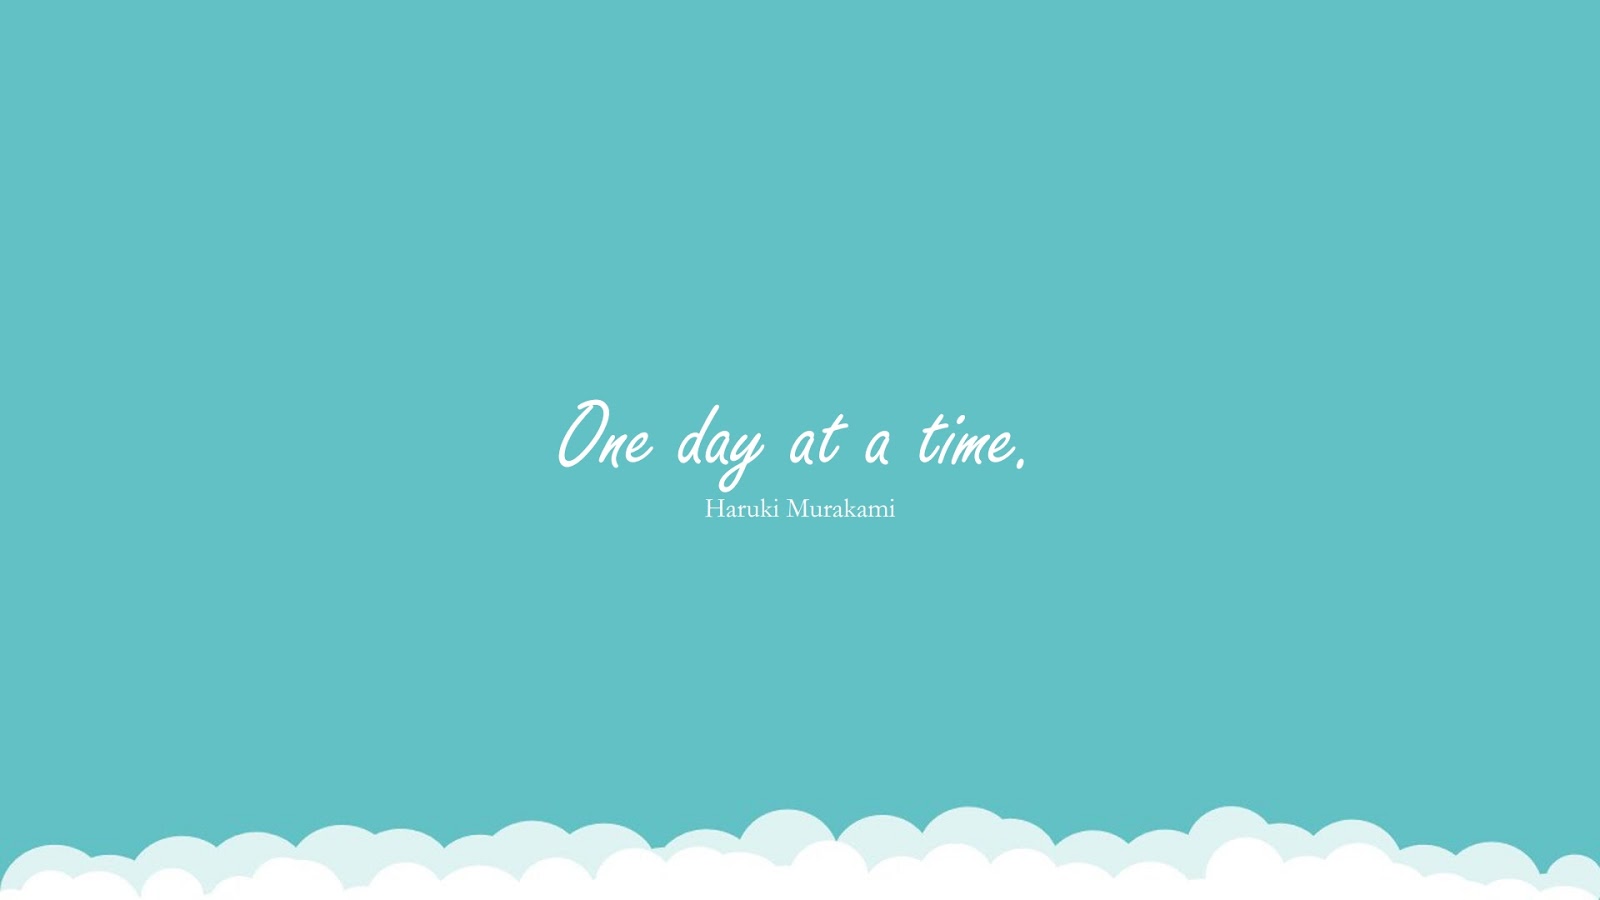 One day at a time. (Haruki Murakami);  #EncouragingQuotes